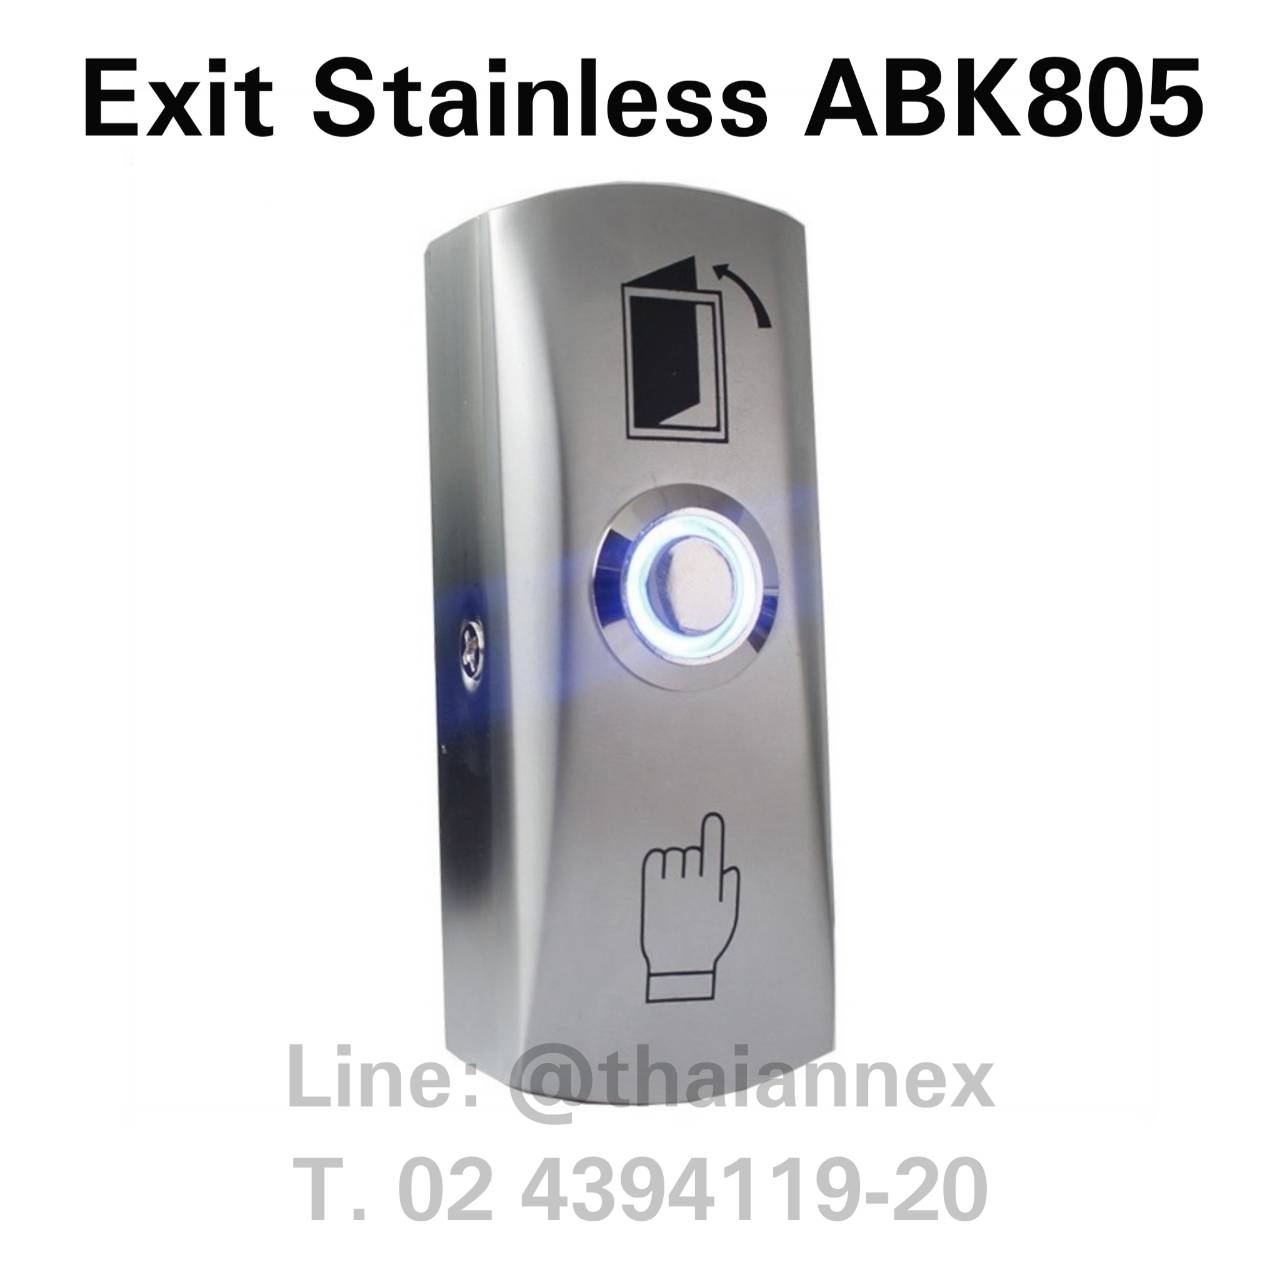 Stainless Exit Switch : ABK805